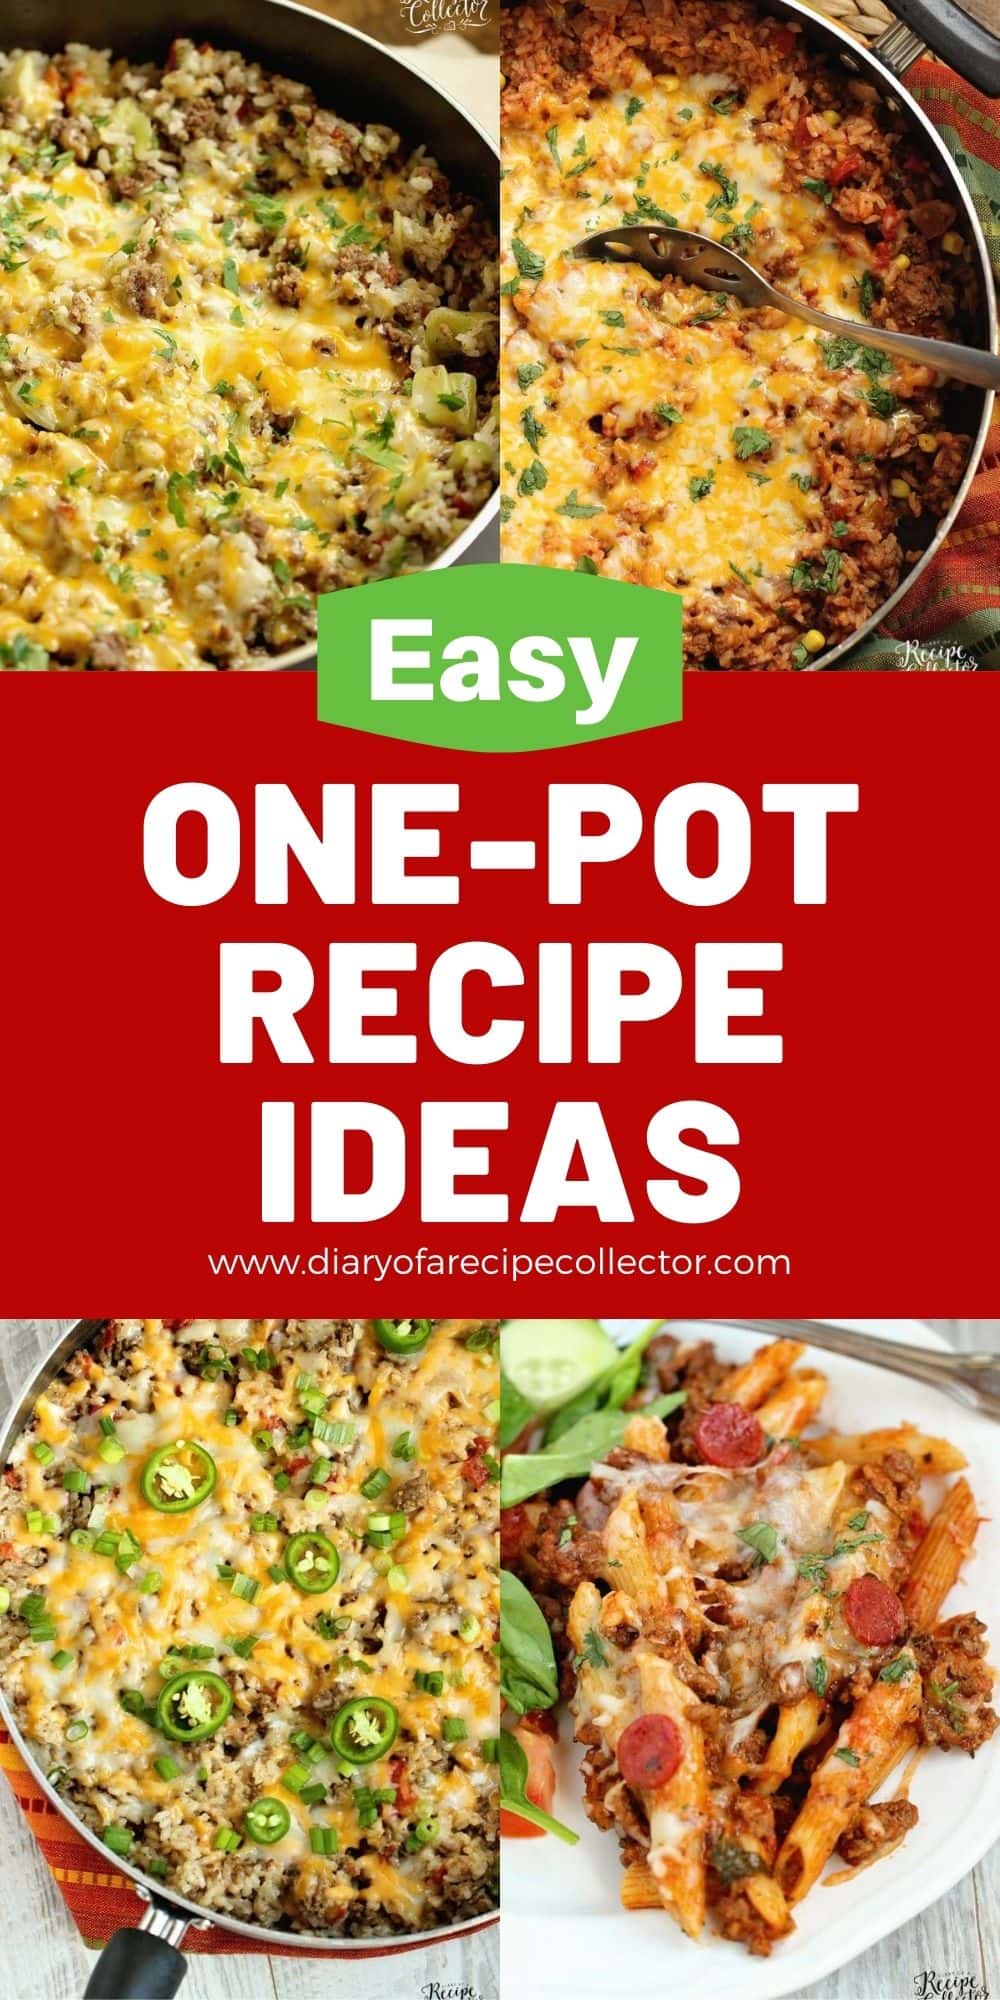 Easy One-Pot Recipes - Diary of A Recipe Collector